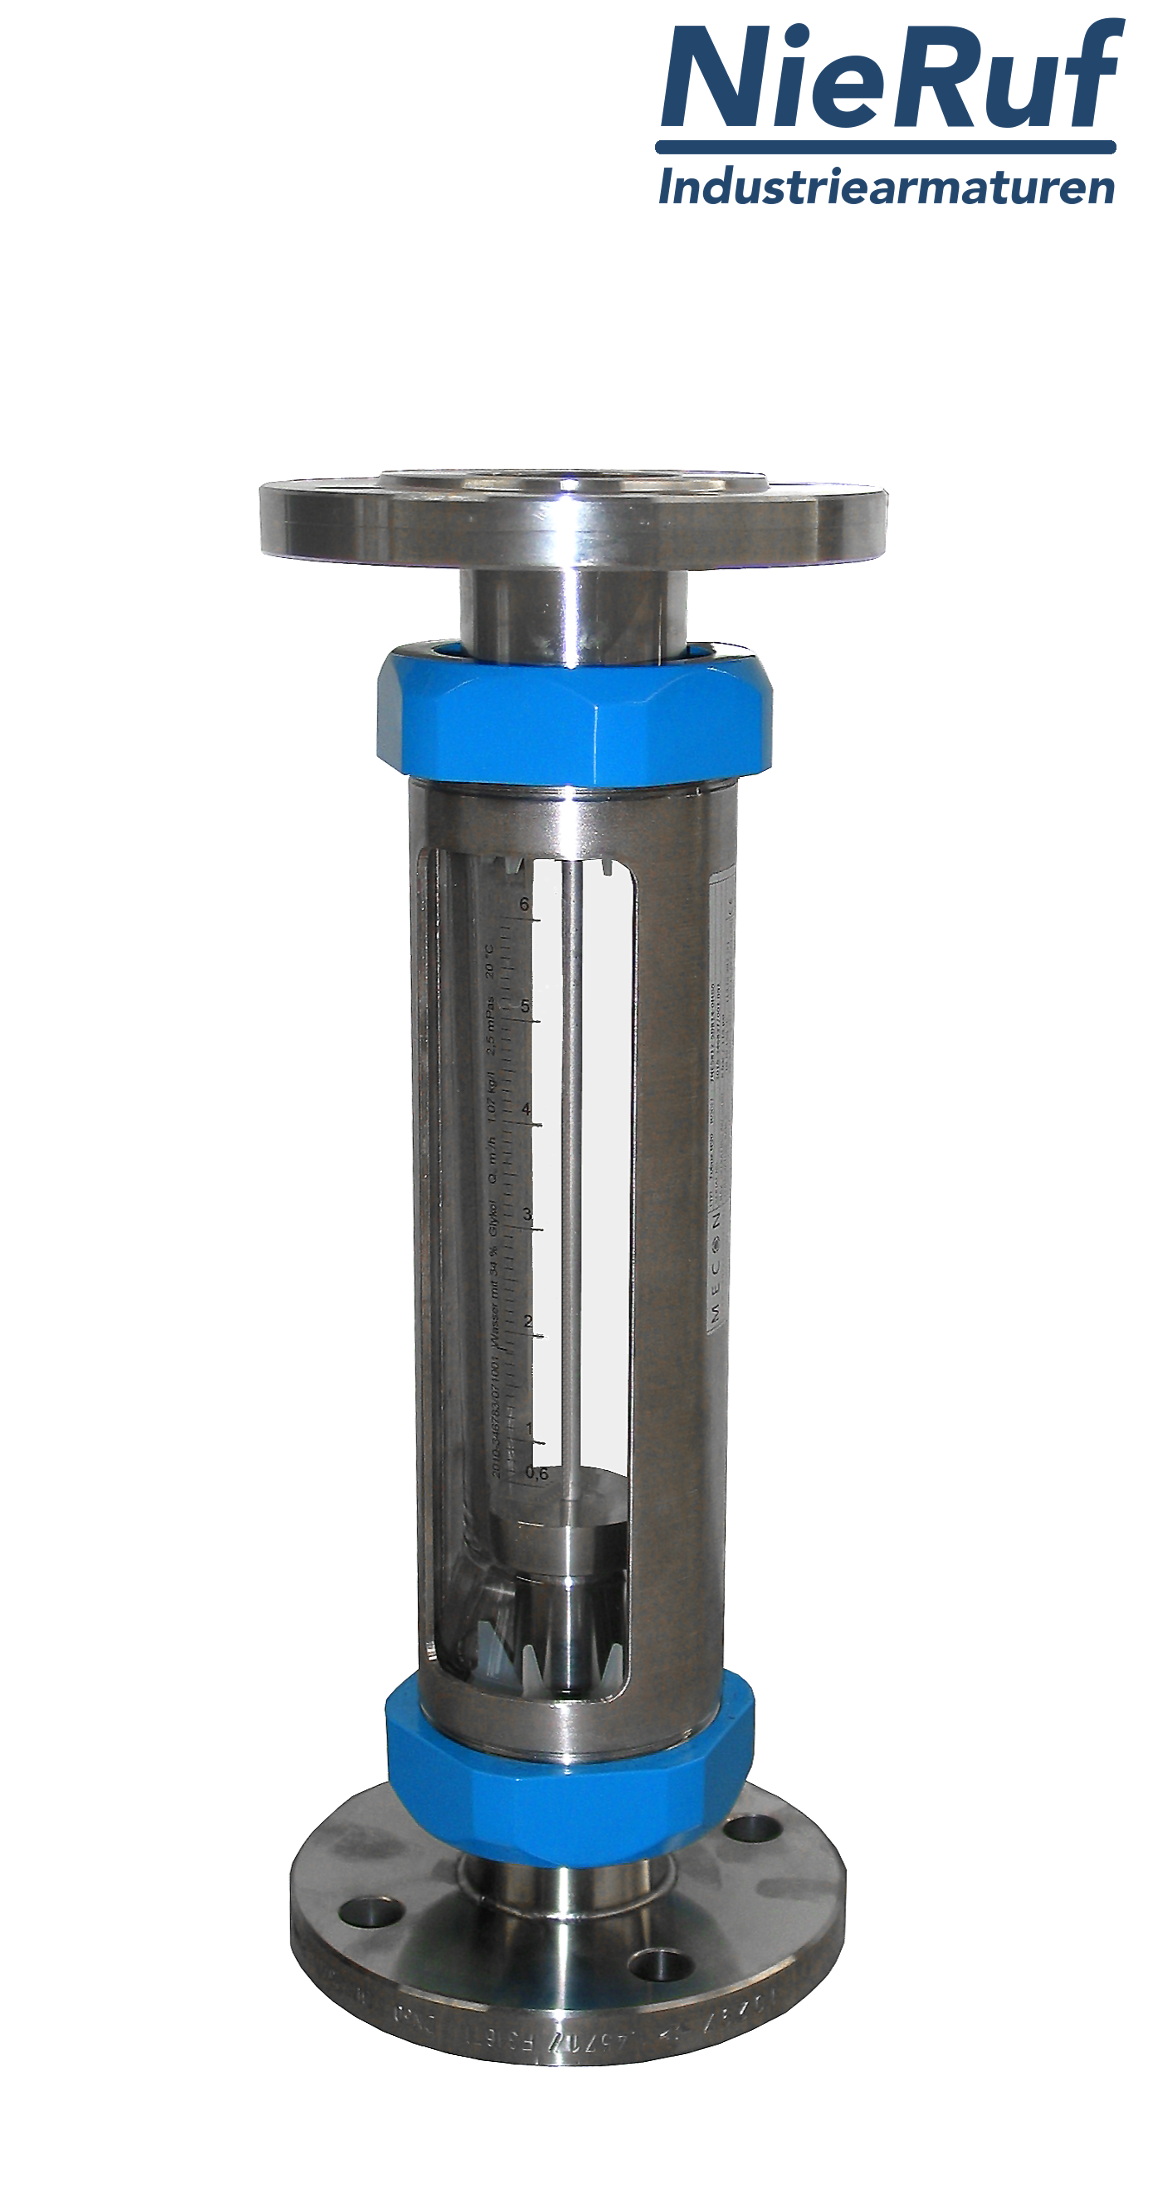 Variable area flowmeter stainless steel + borosilicate flange DN40 4000.0 - 16000 l/h water FKM